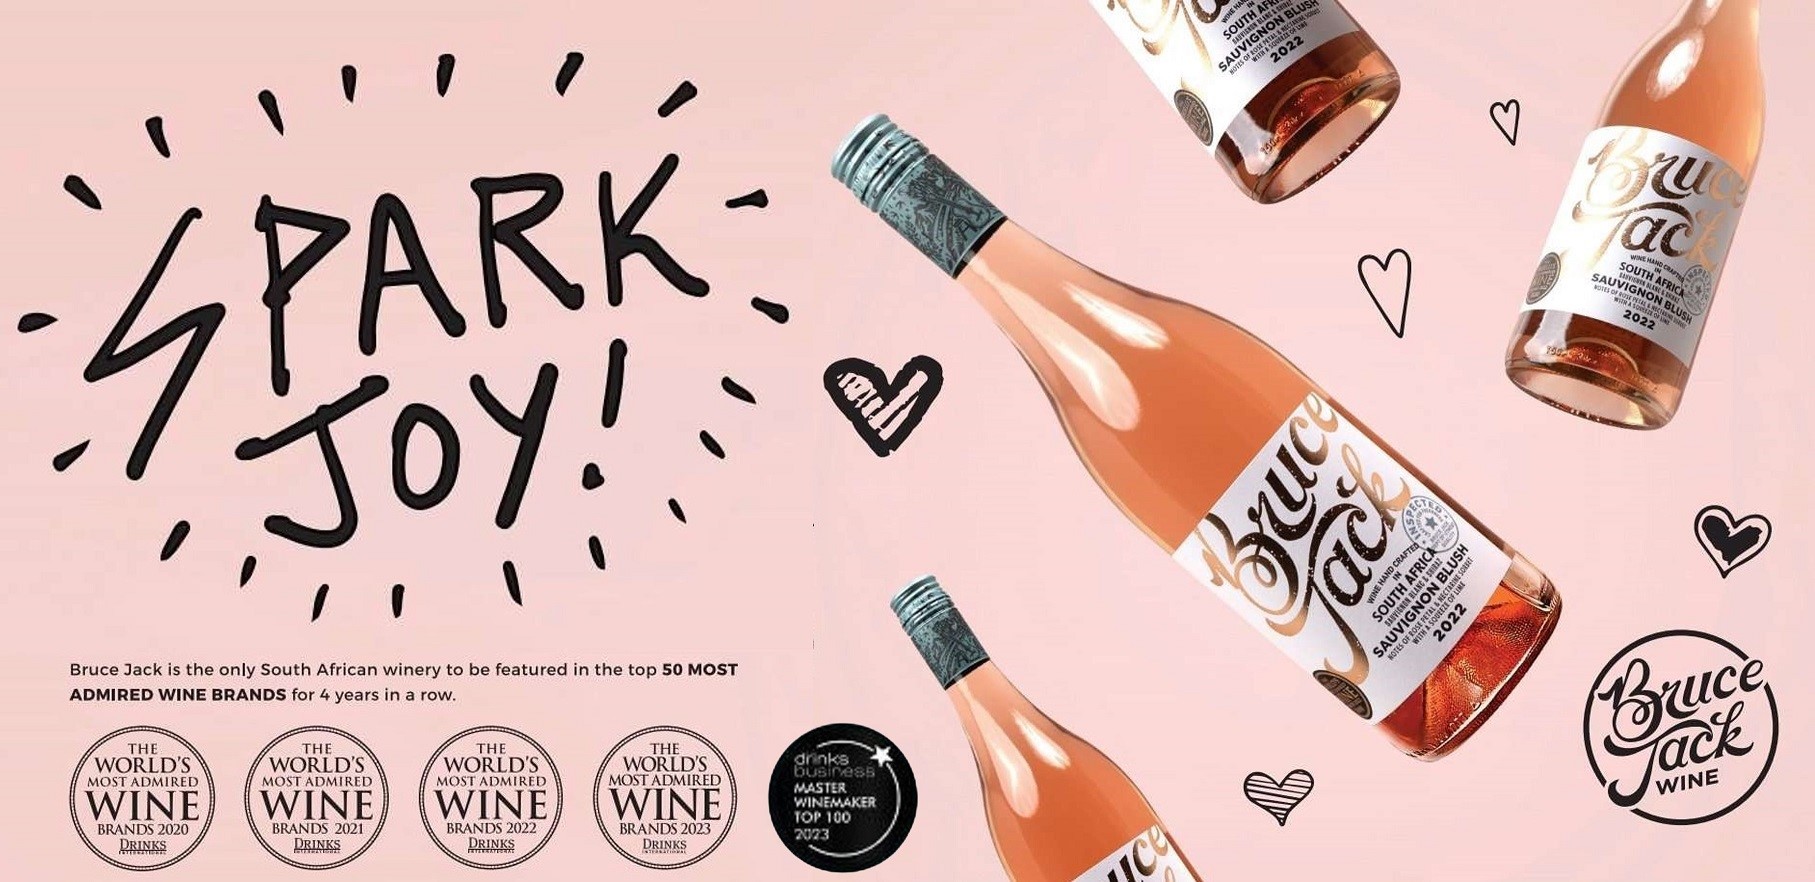 You are currently viewing Spark Joy This Valentine’s Day With Bruce Jack Sauvignon Blush